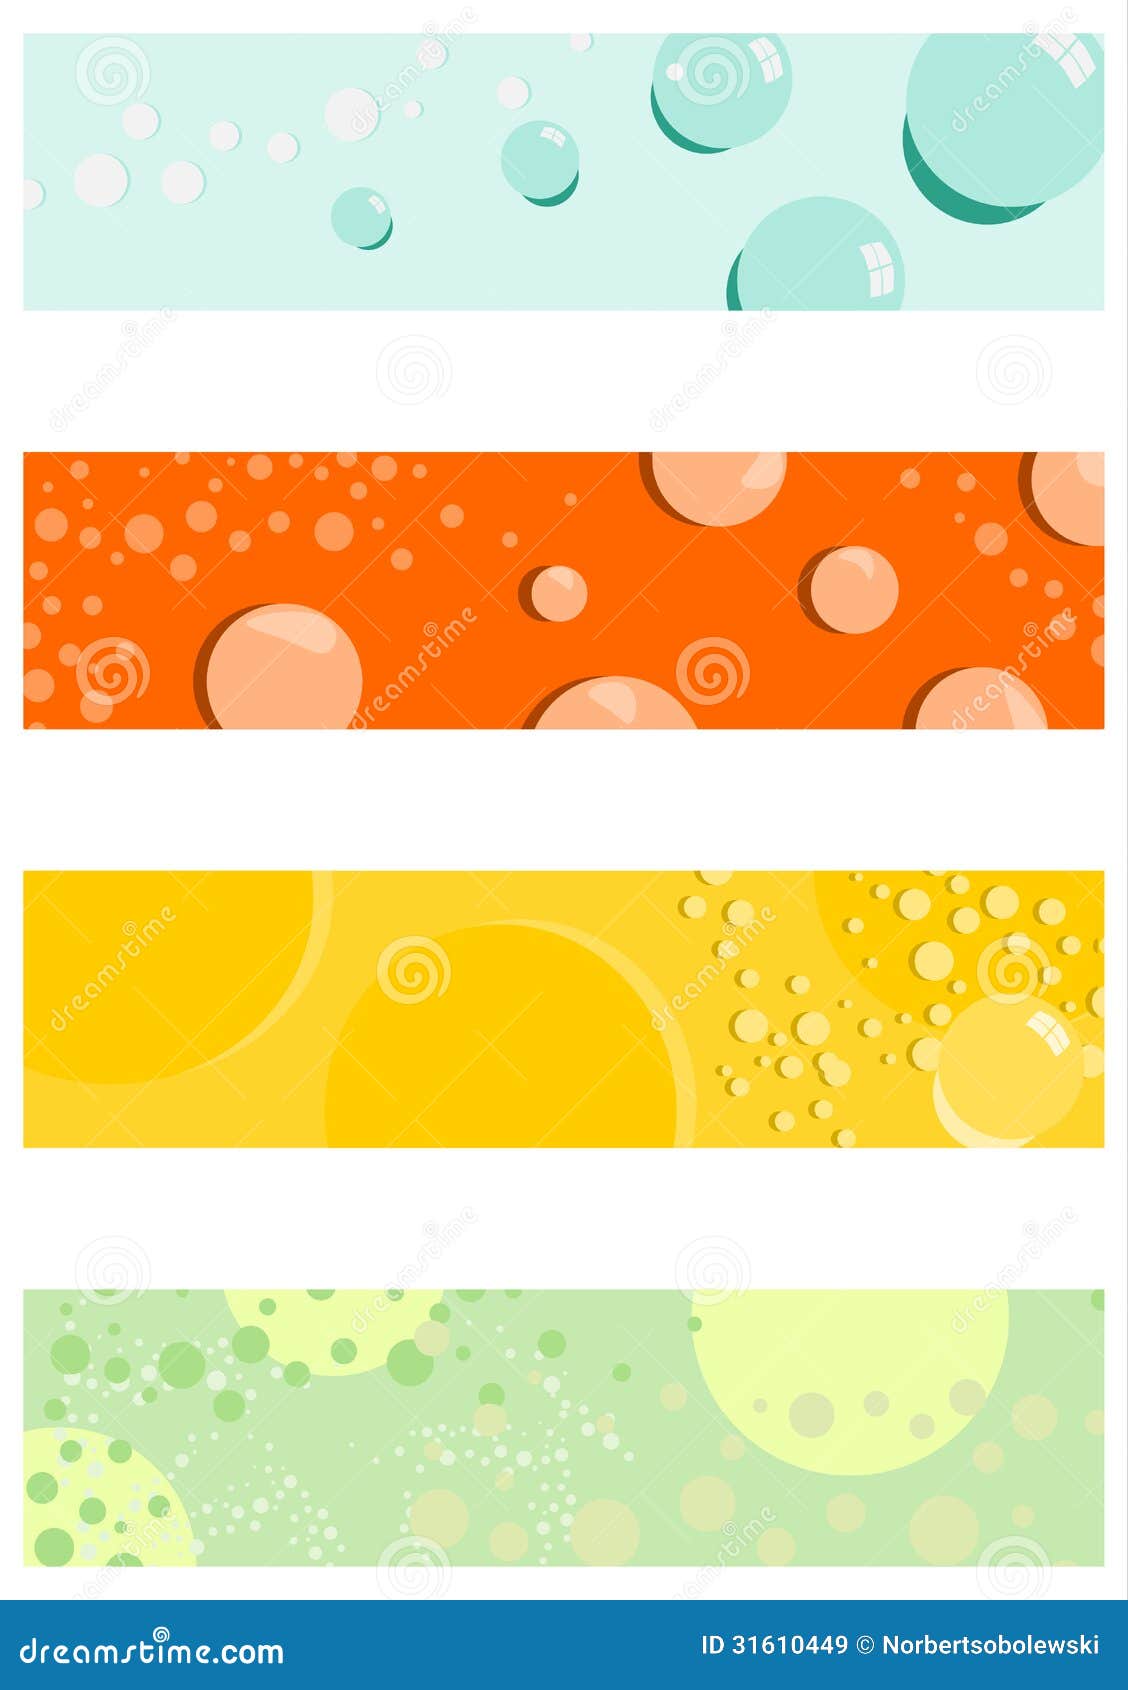  Half Banners Background Set With Bubbles Royalty Free 